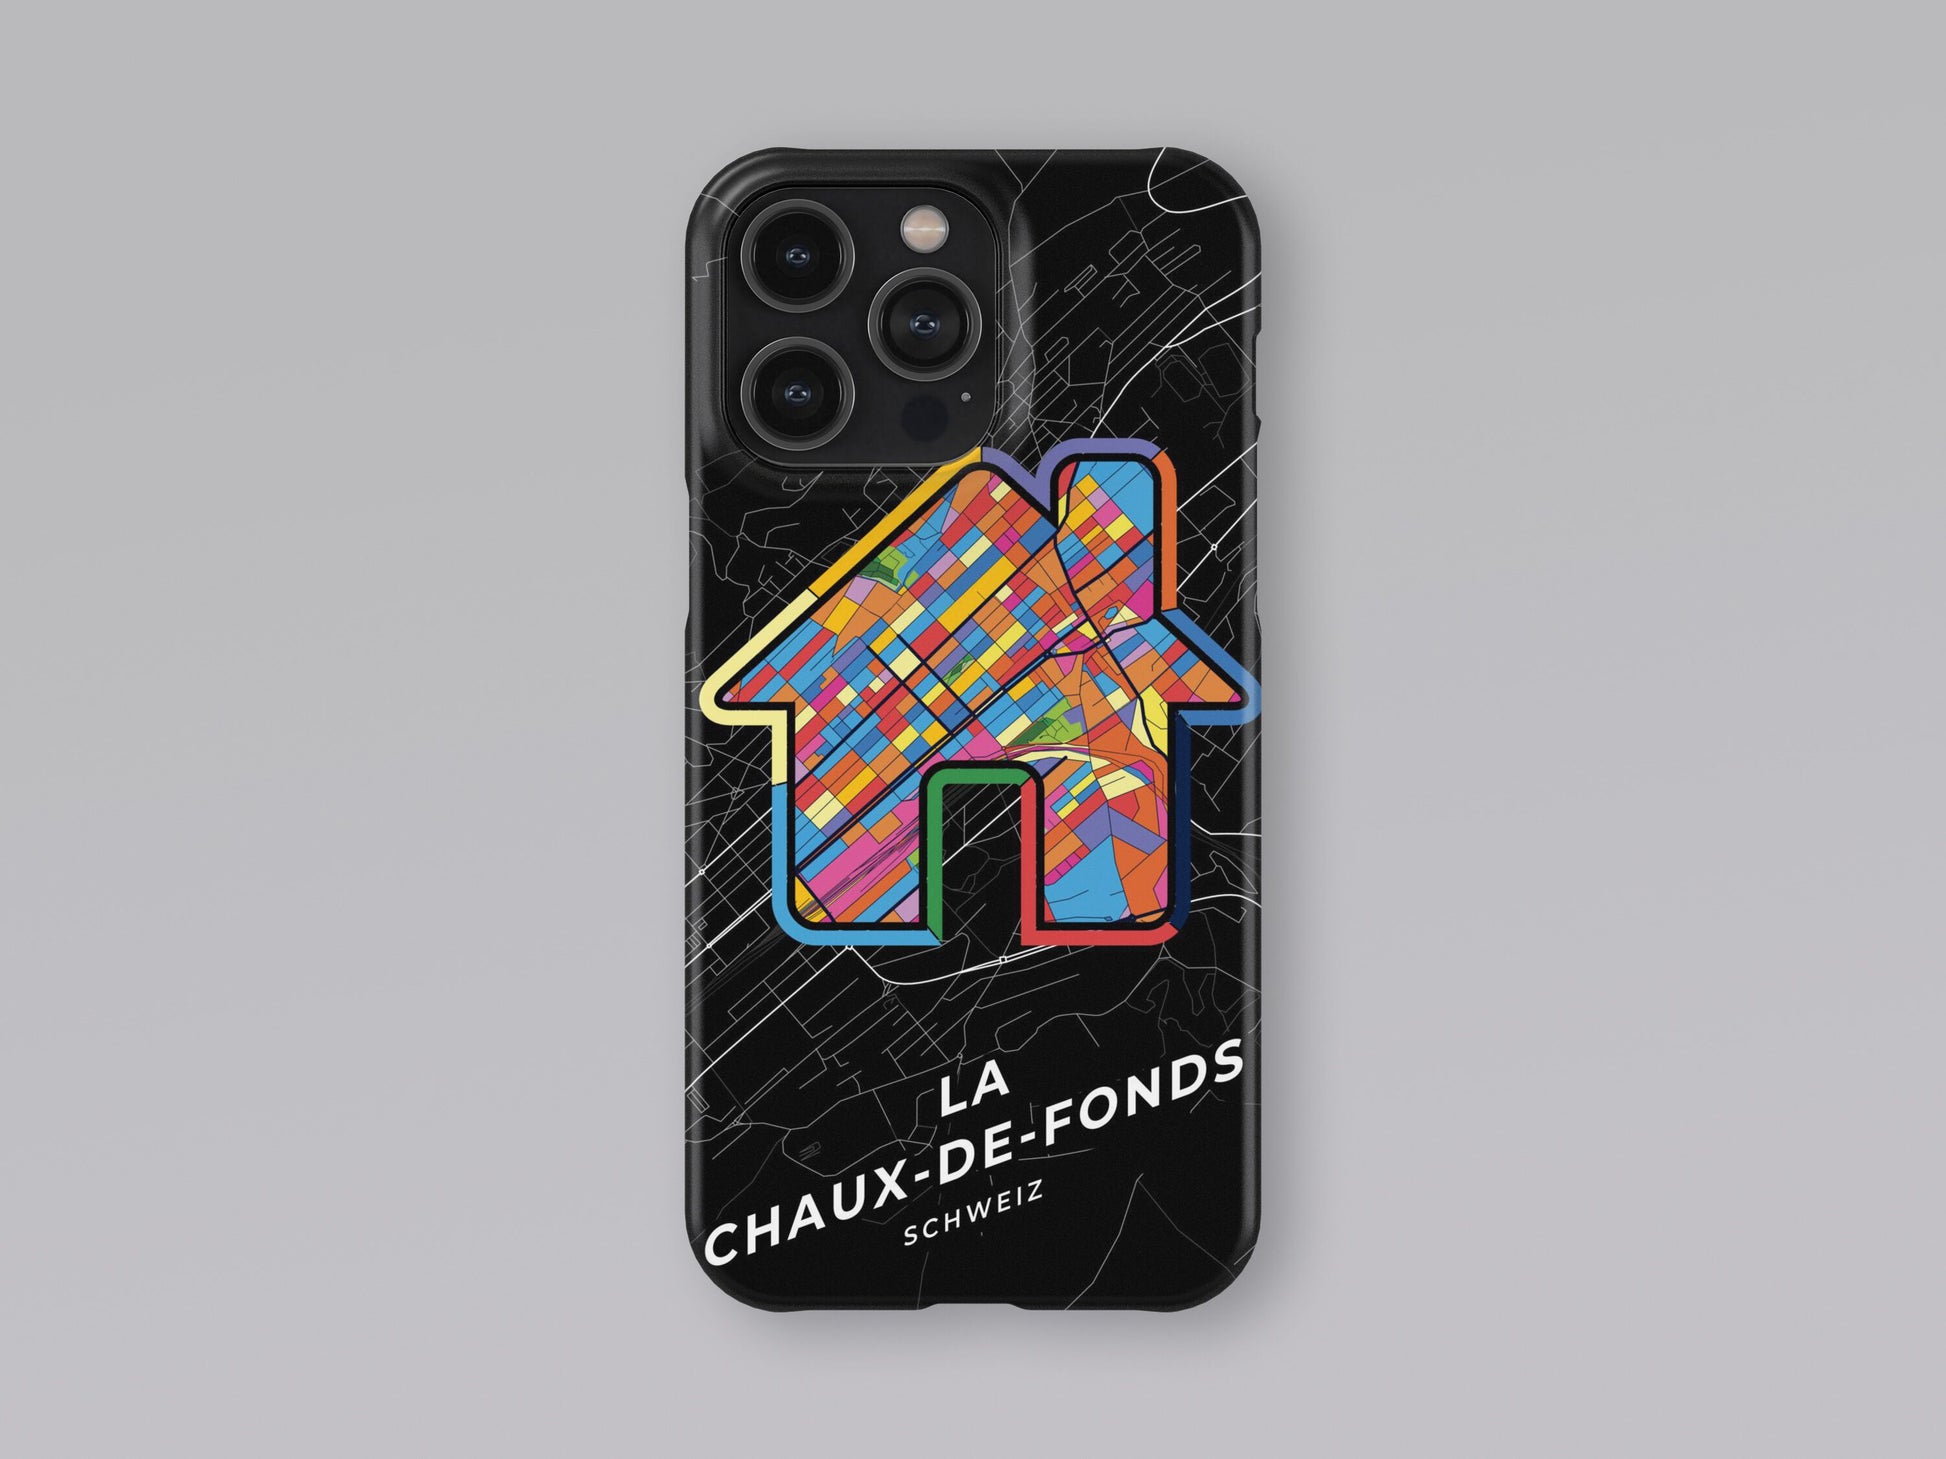 La Chaux-De-Fonds Switzerland slim phone case with colorful icon. Birthday, wedding or housewarming gift. Couple match cases. 3